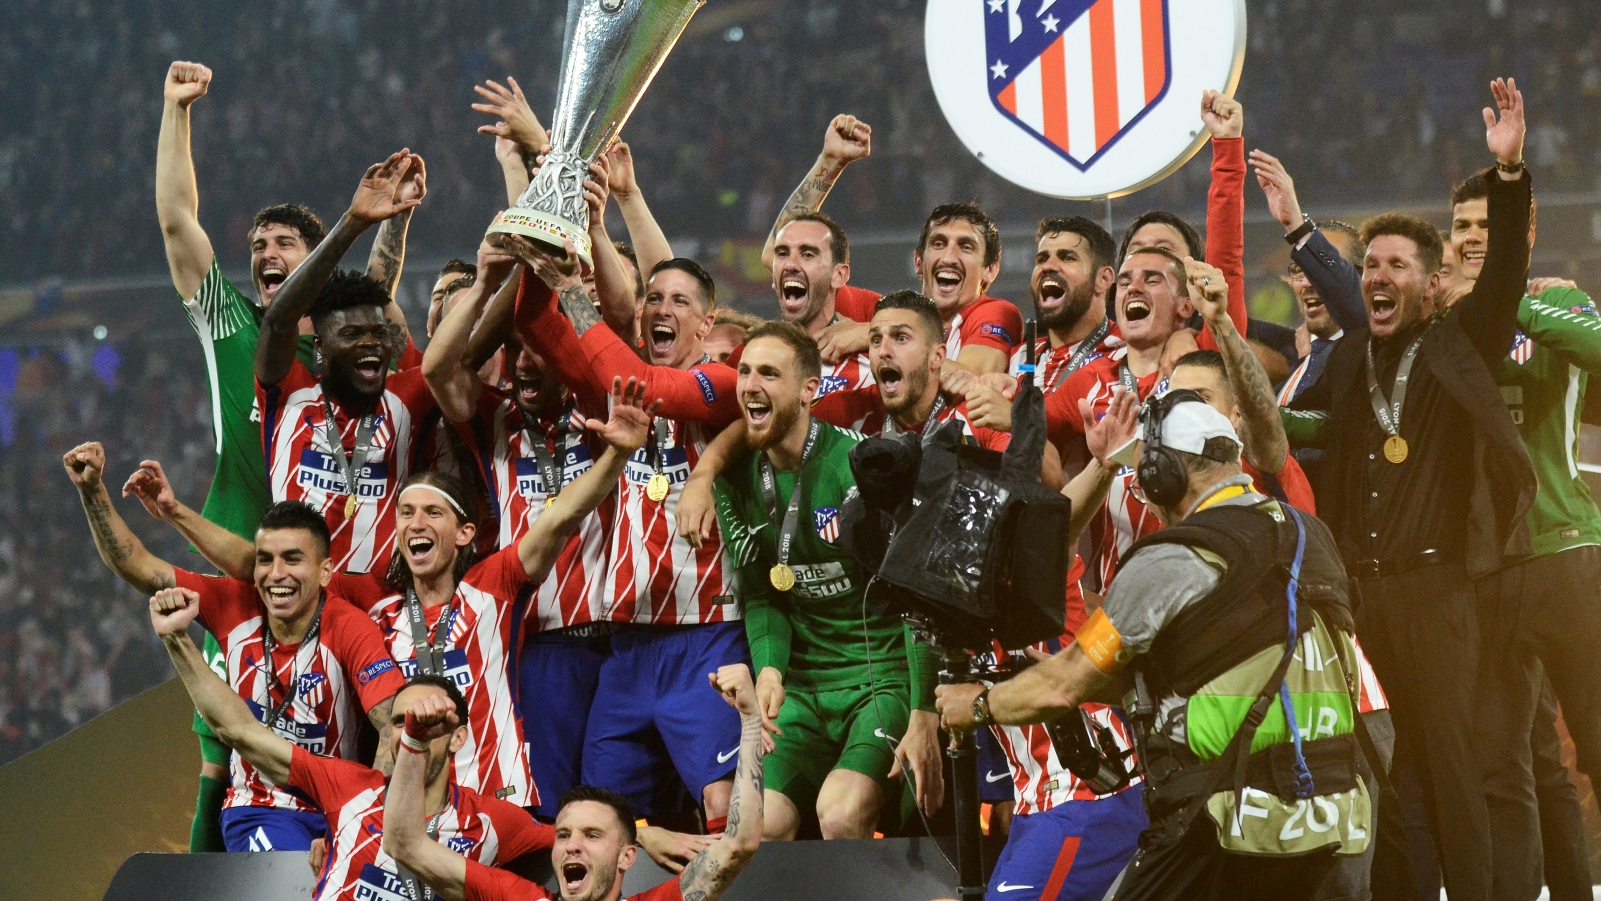 Atletico Madrid players and staff celebrate after the UEFA Europa League Final at Stade de Lyon, May 2018. Photo via Shutterstock.com